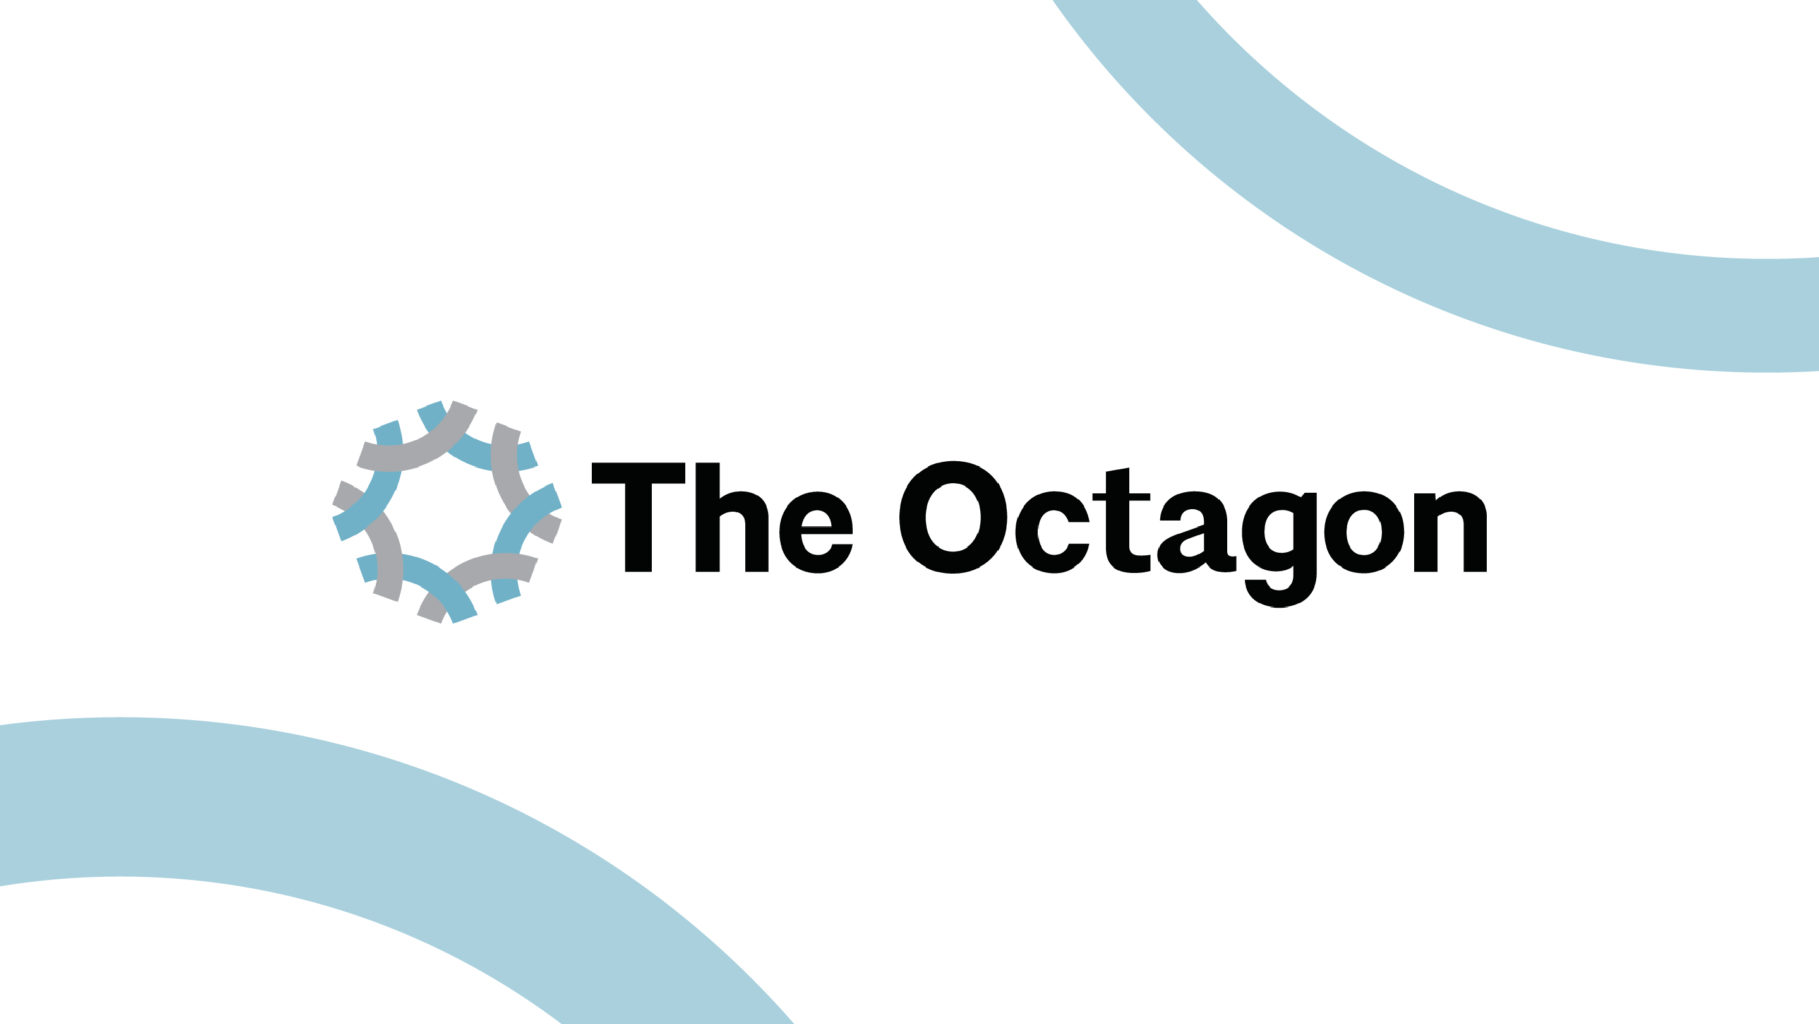 MMD Works with Architects Foundation on The Octagon